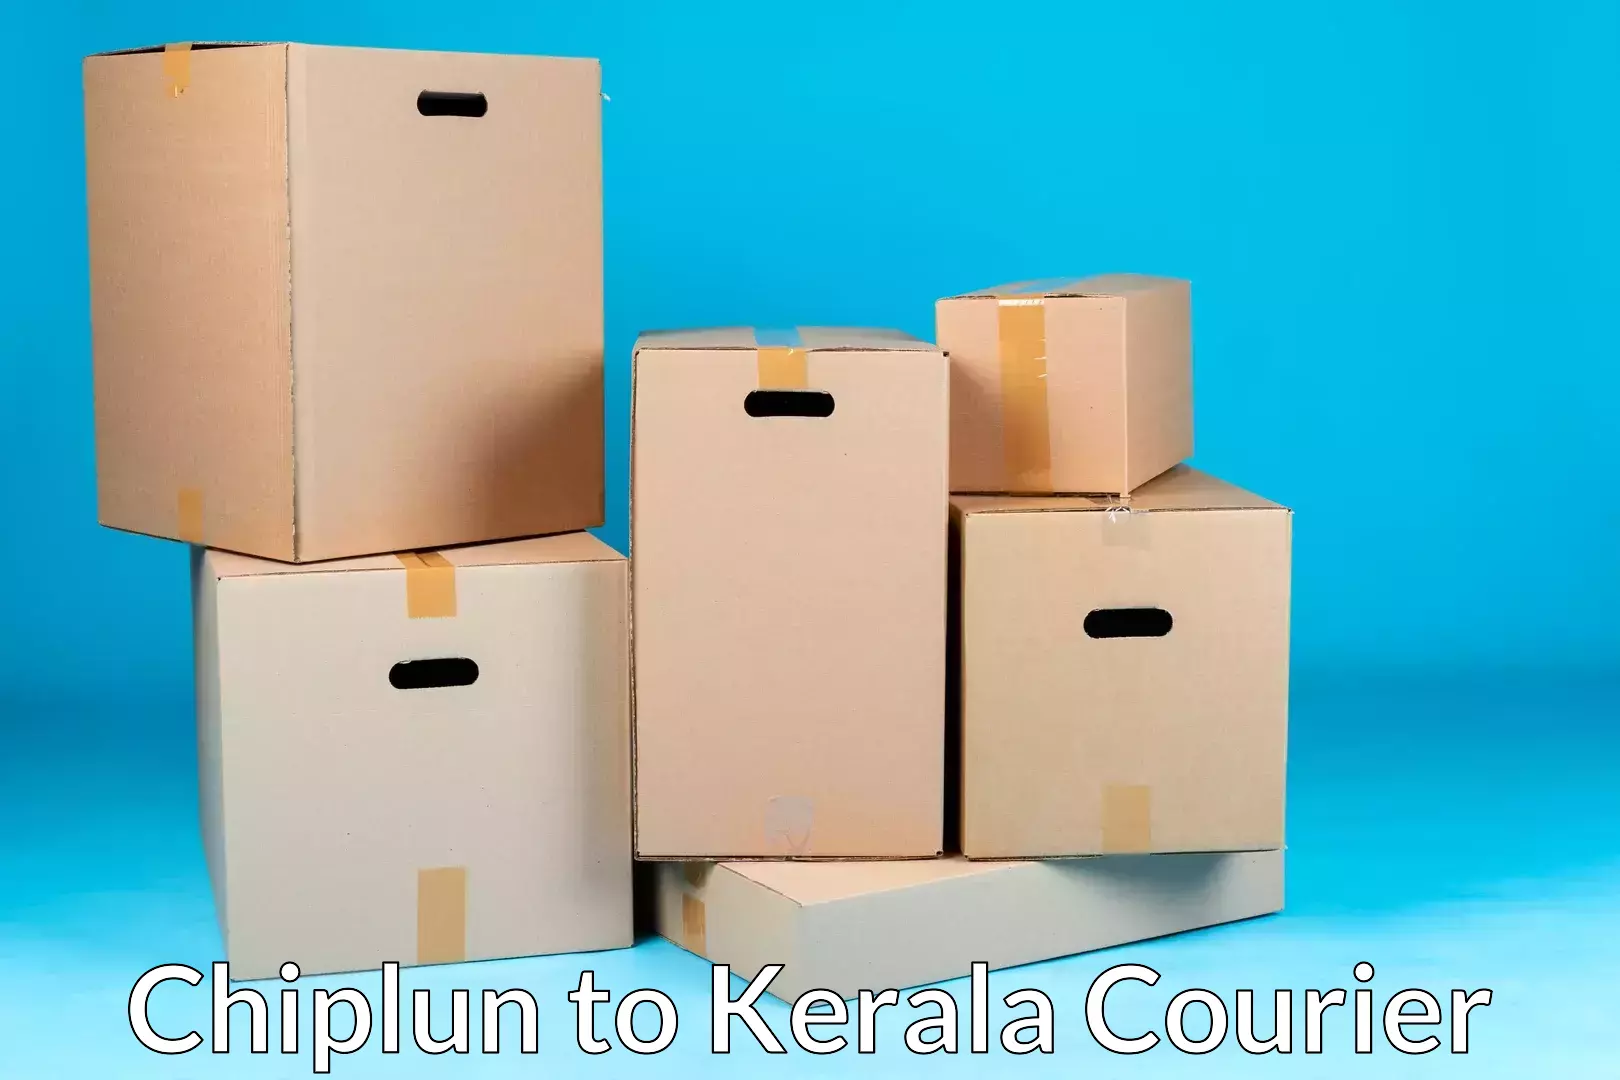 Trusted moving company Chiplun to Kerala